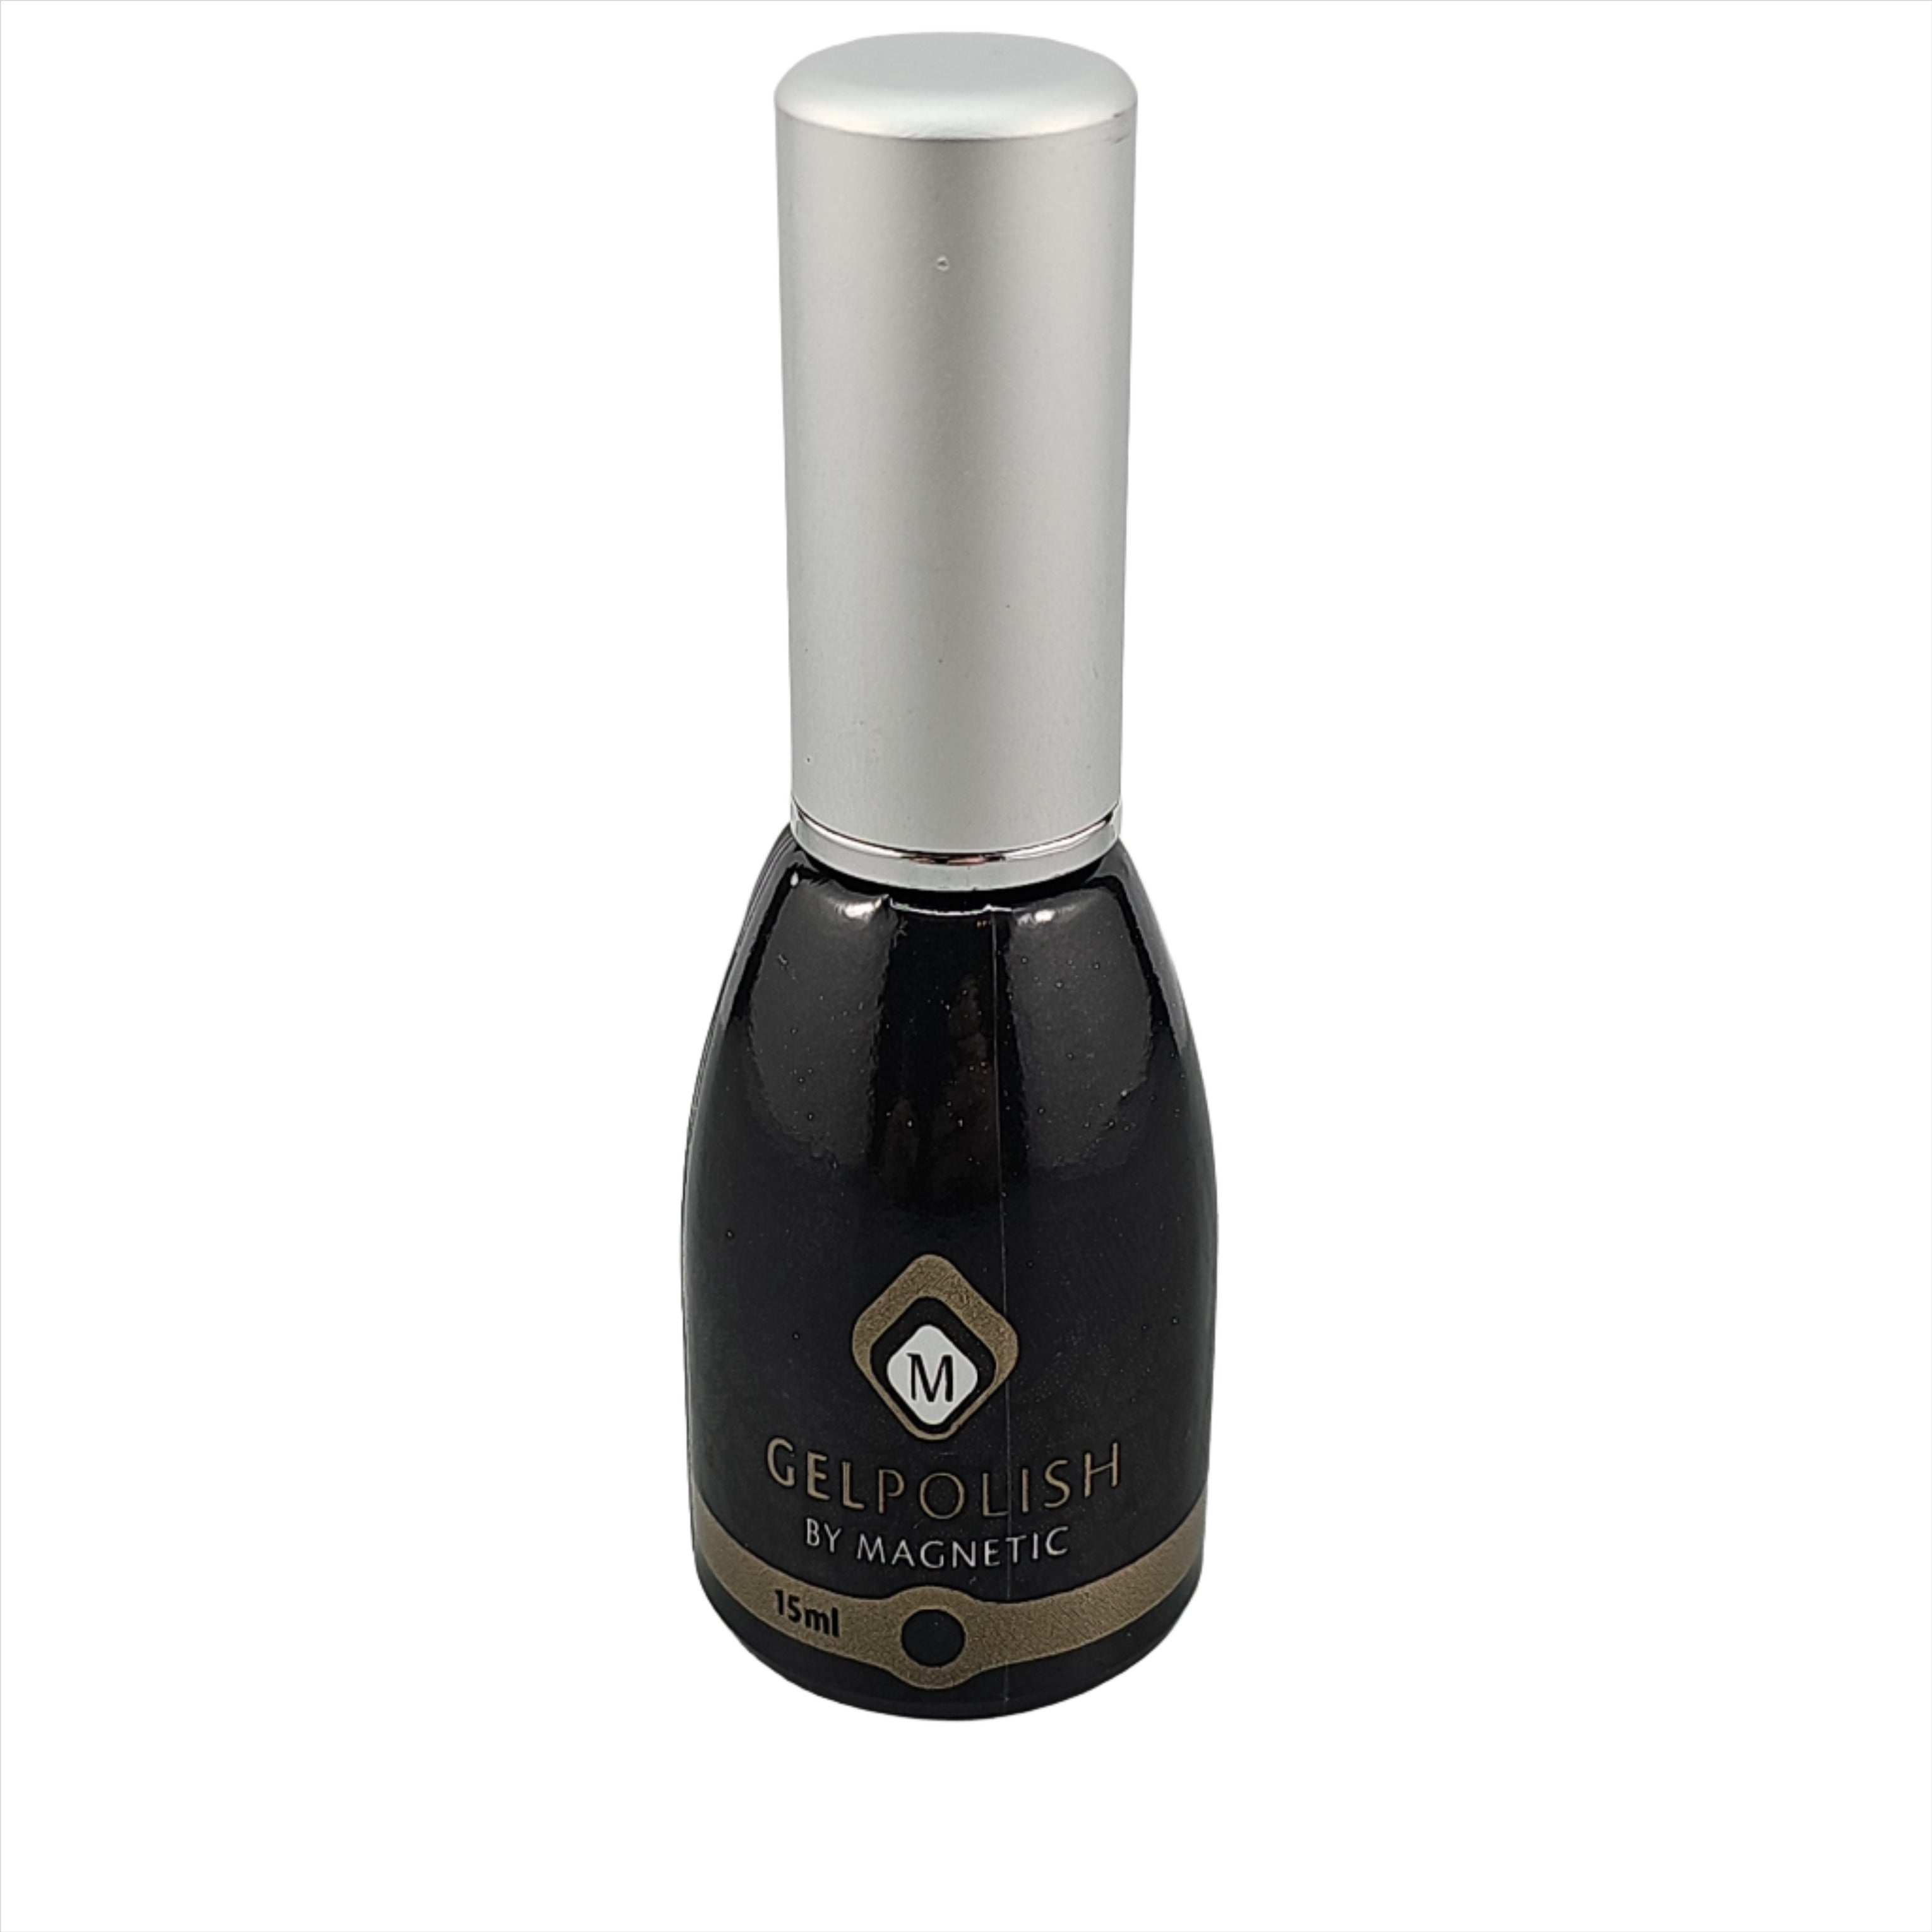 Magnetic Gelpolish Pale Taupe 15 ml - Creata Beauty - Professional Beauty Products